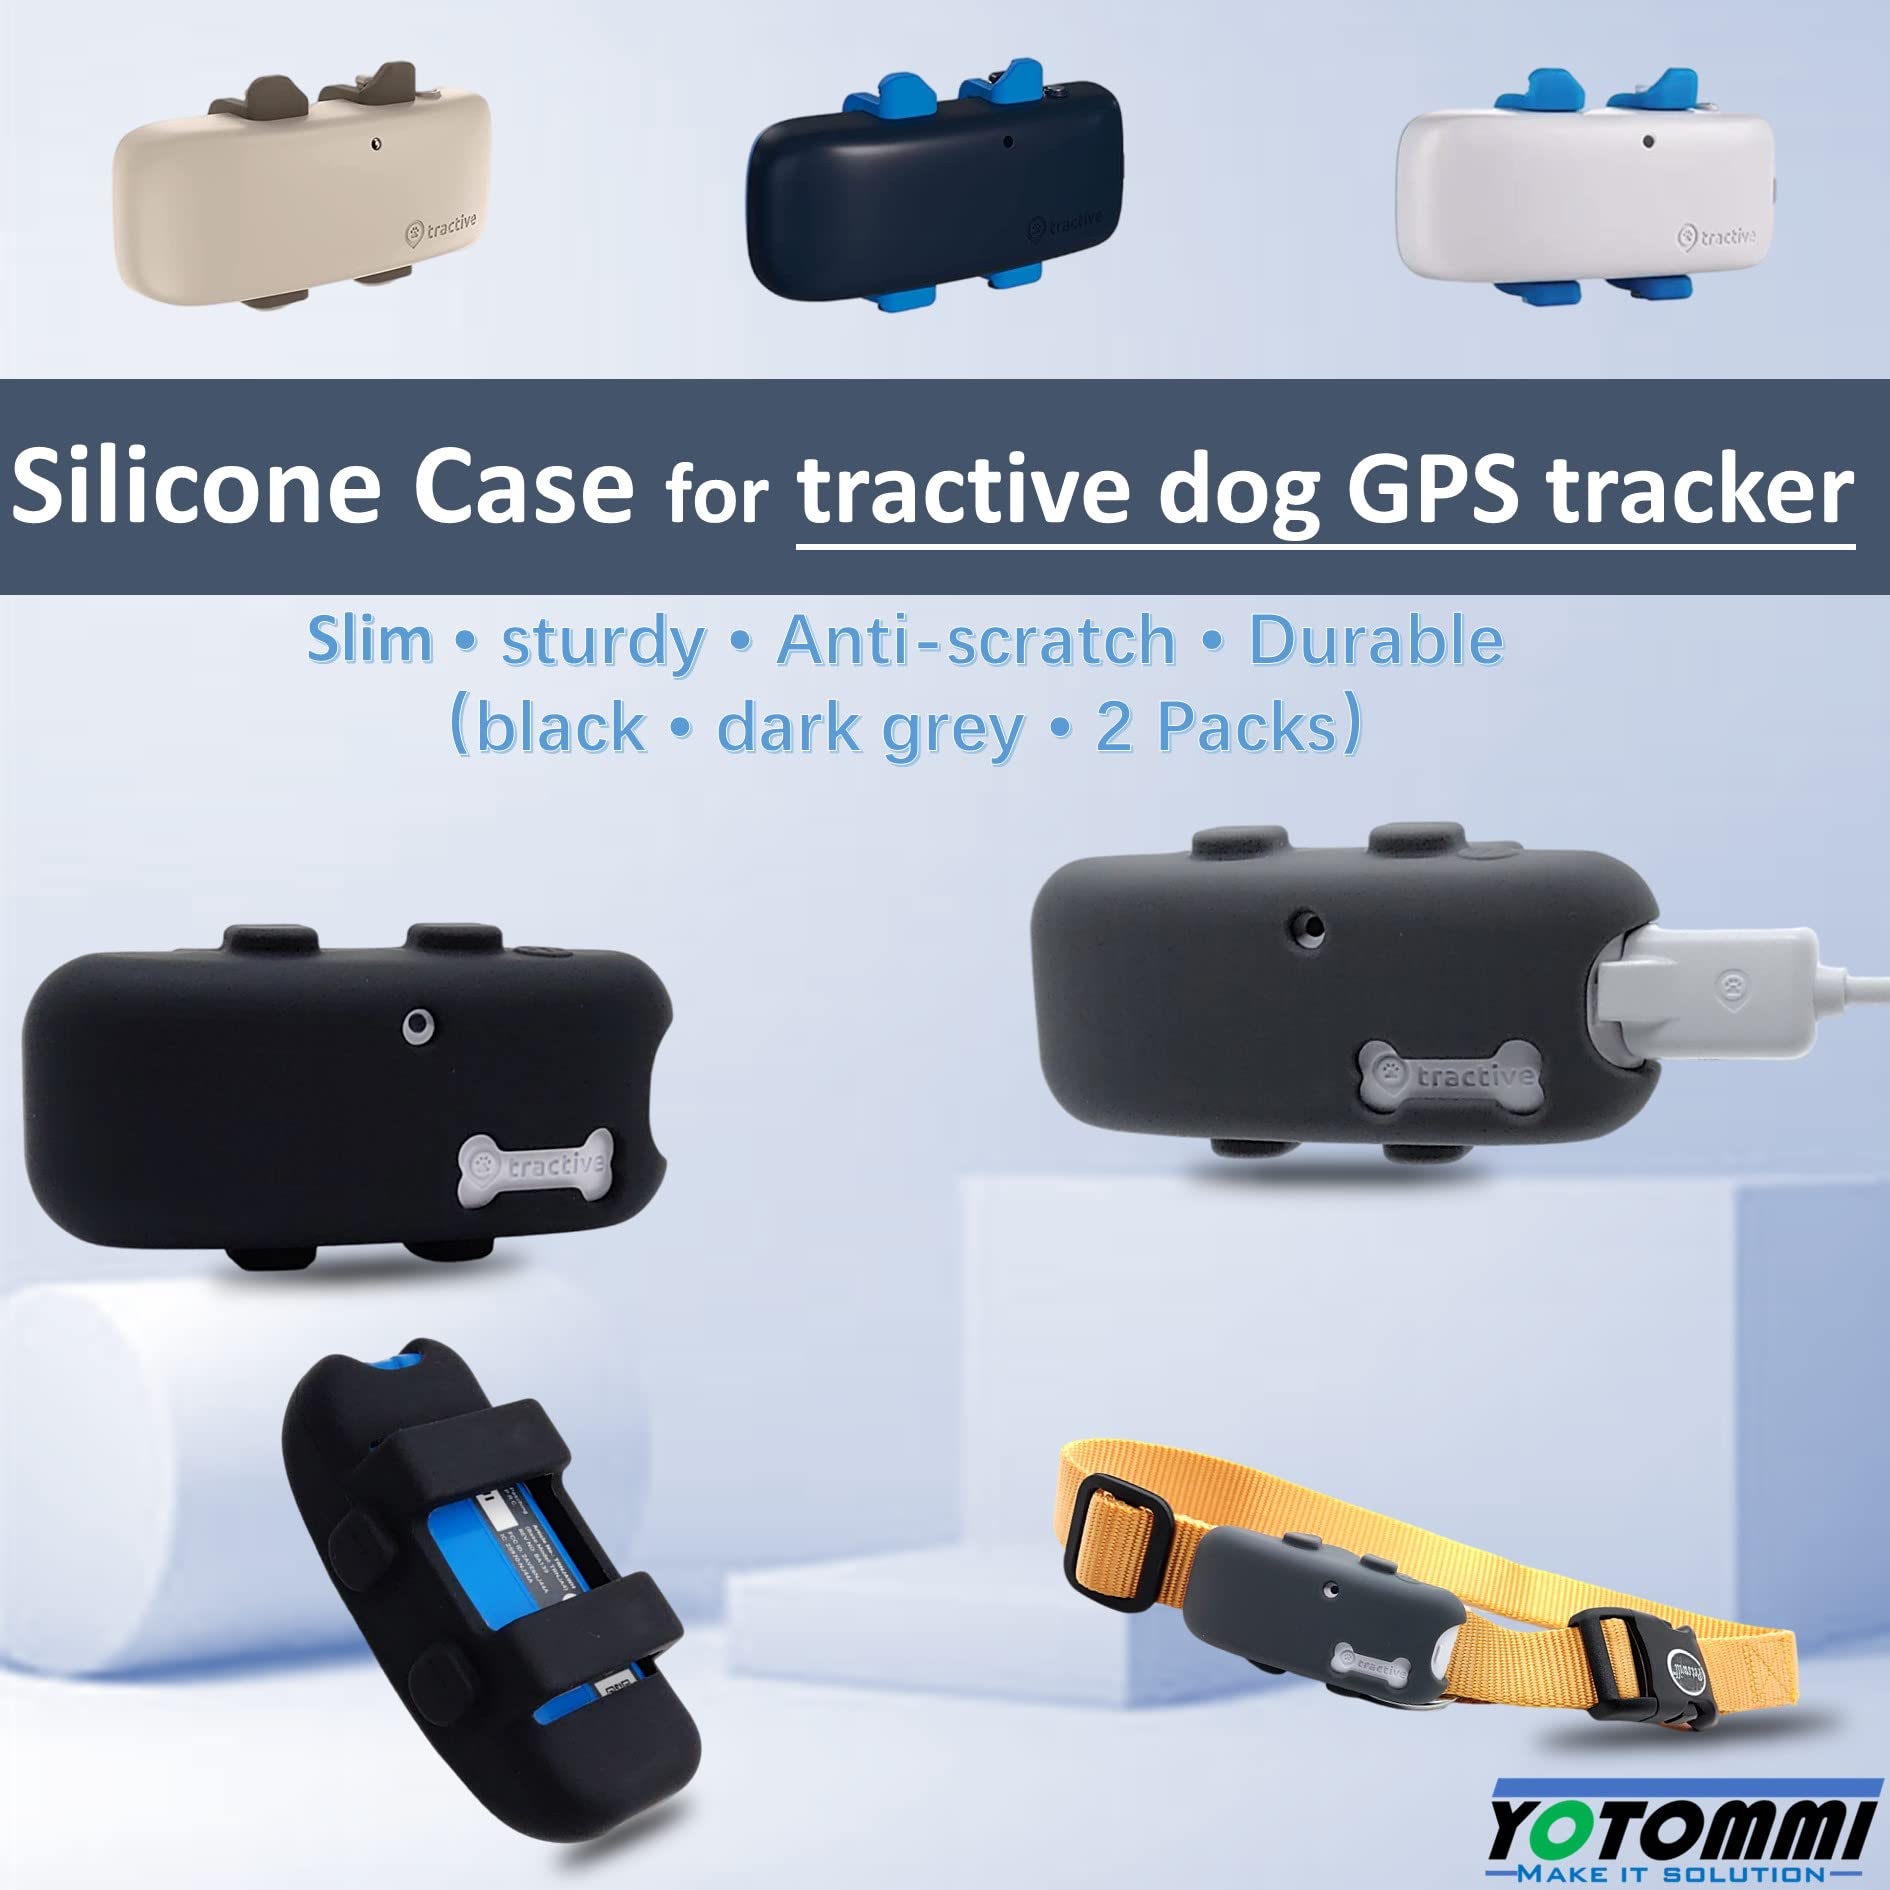 2 Packs Silicone Holder for Tractive GPS Pet Tracker,Waterproof Rubber Accessories Cover Item Finder Anti-Scratch,Secure Sturdy Lightweight case with Strap for Dog cat Collar (Black,Grey)